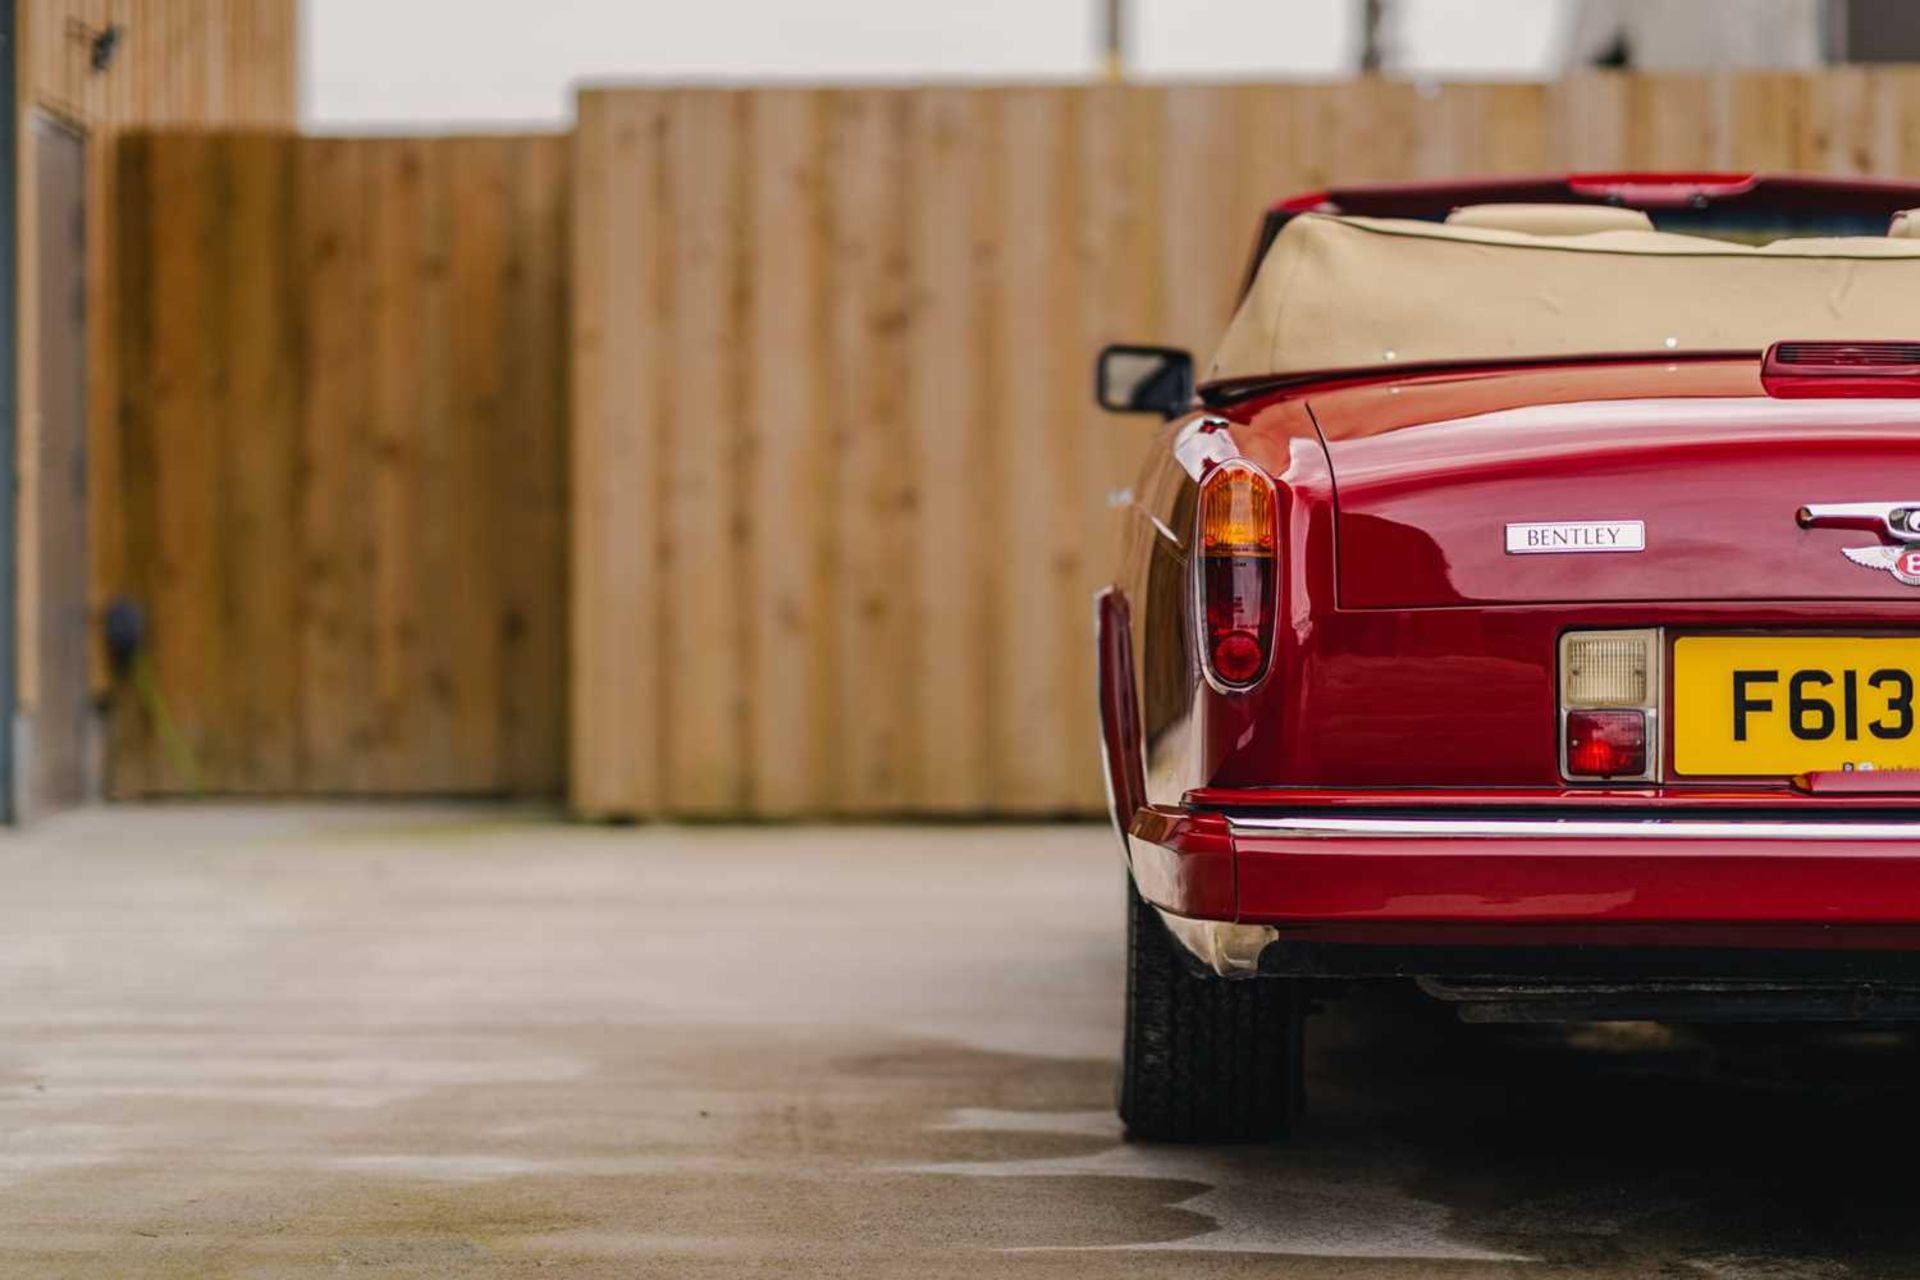 1989 Bentley Continental Convertible Meticulously maintained and boasts desirable factory options su - Image 9 of 71